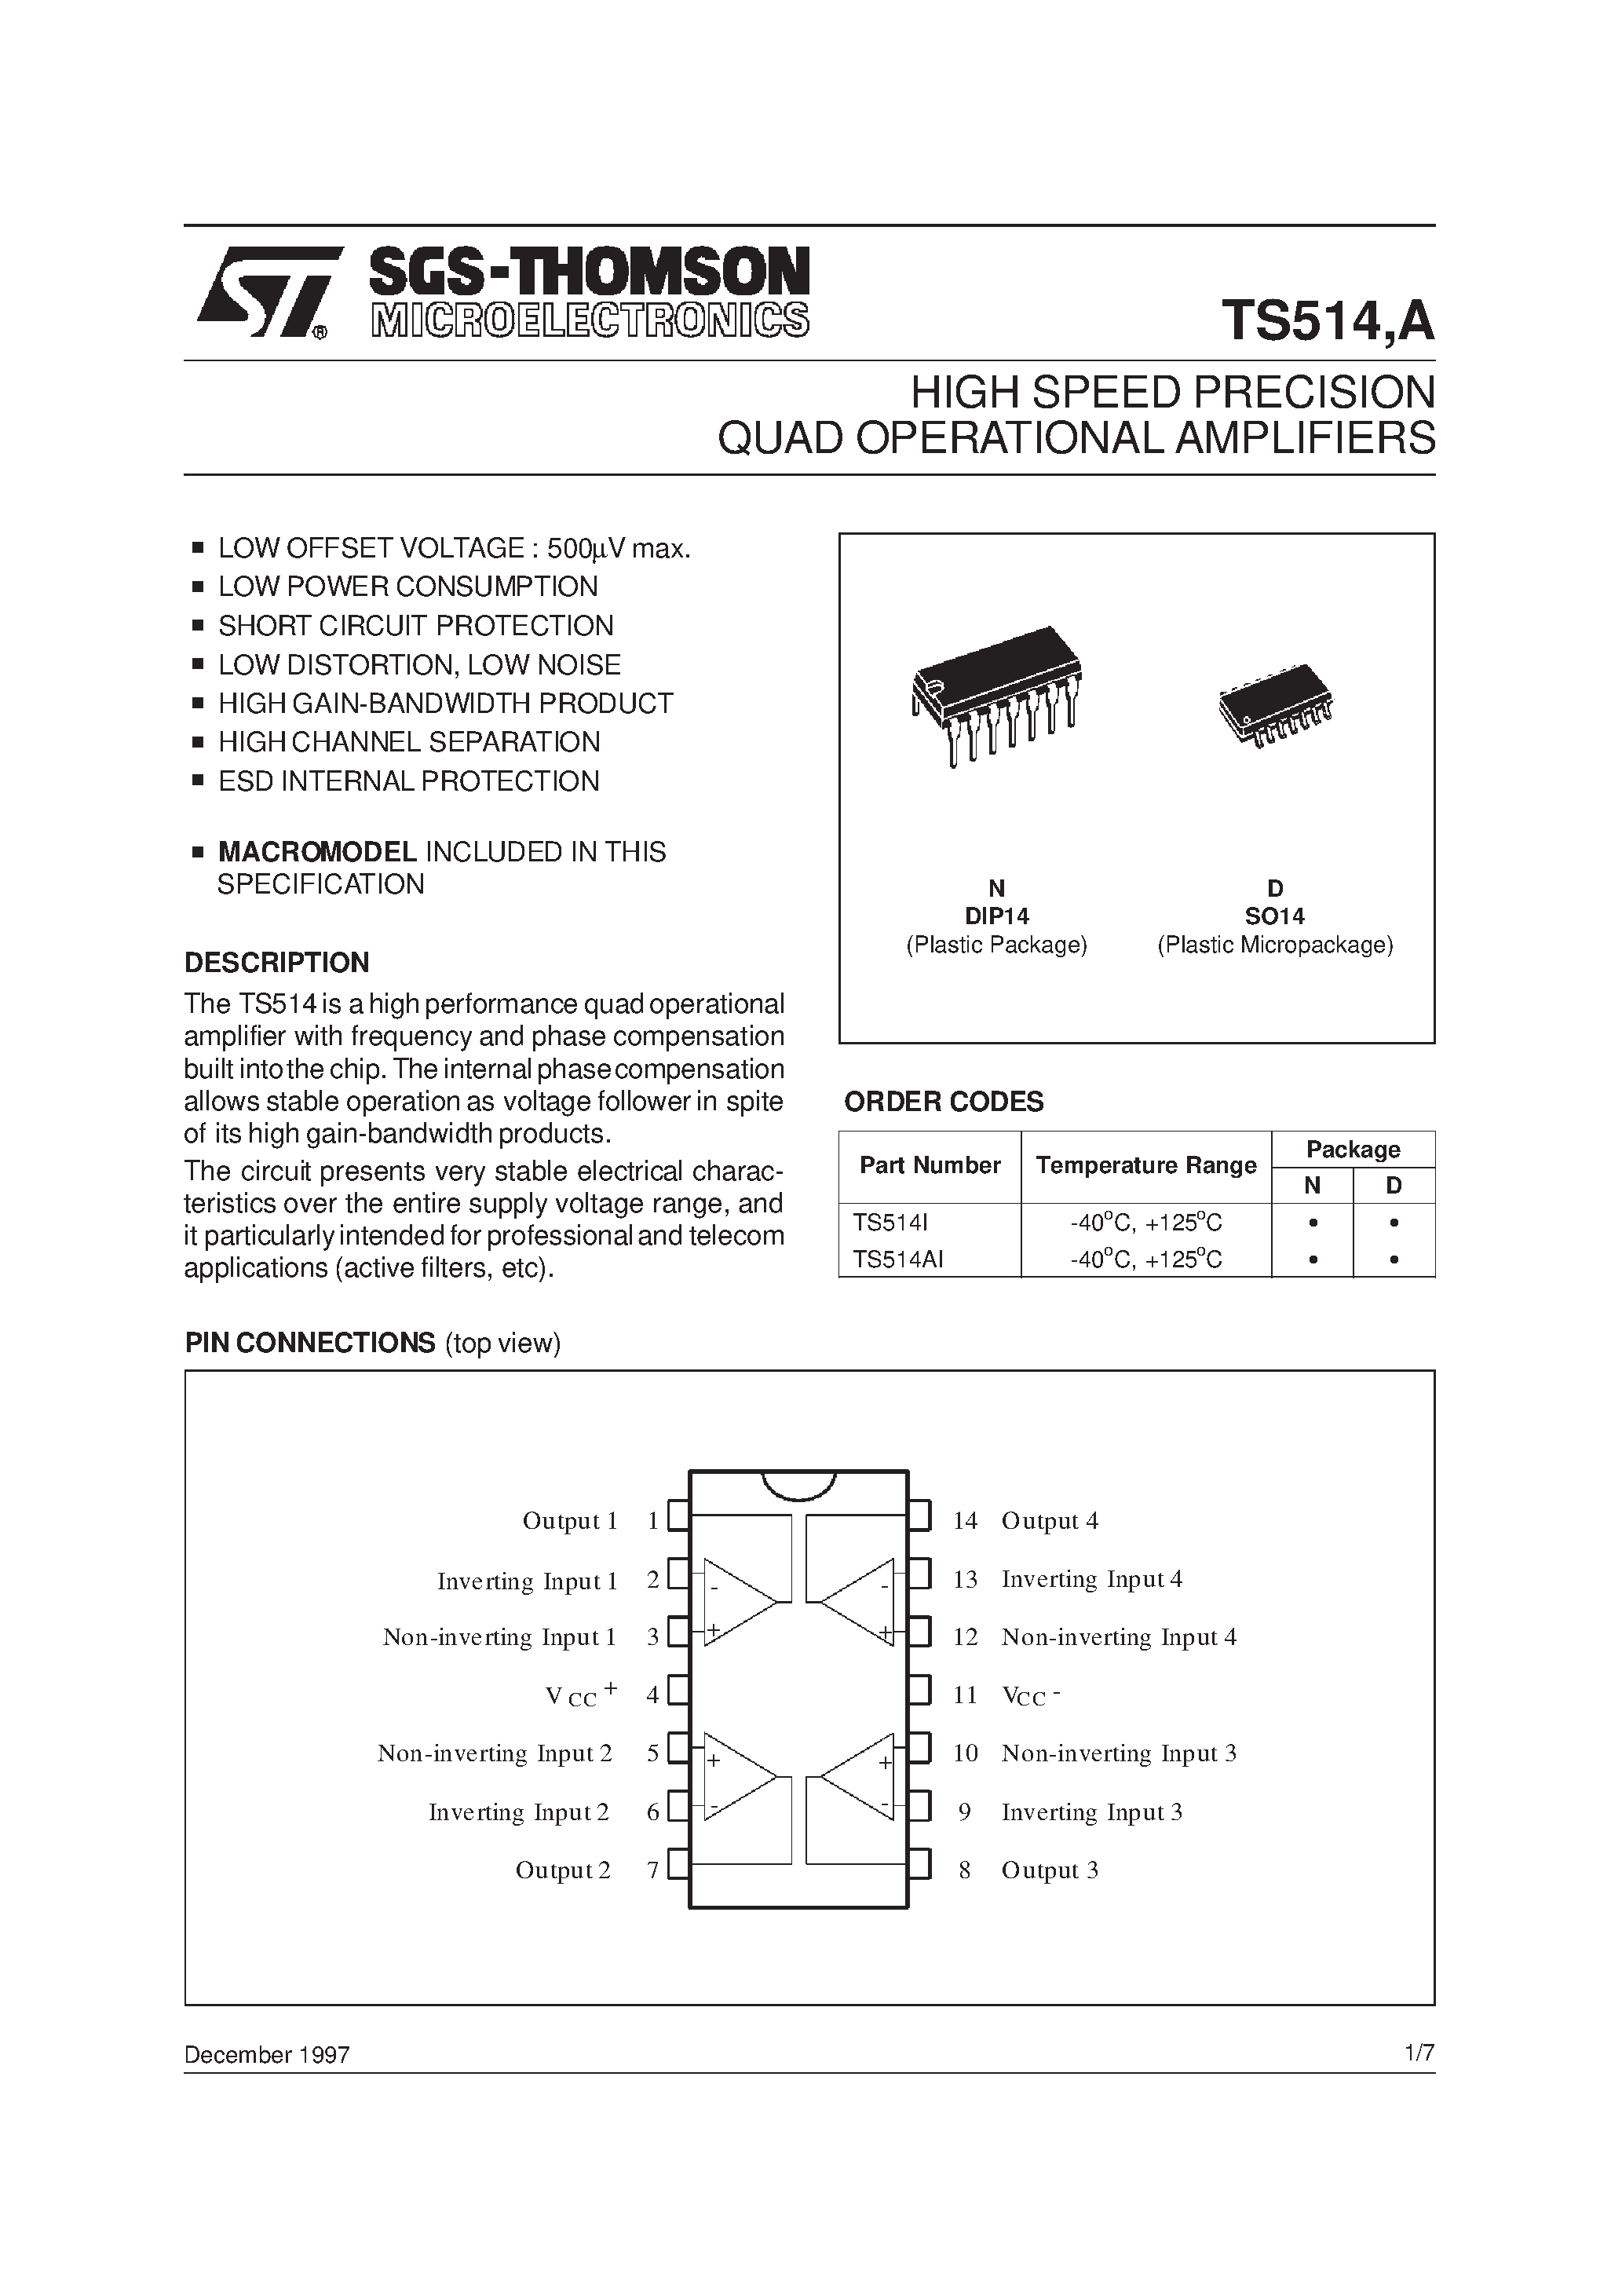 Datasheet TS514 - HIGH SPEED PRECISION QUAD OPERATIONAL AMPLIFIERS page 1